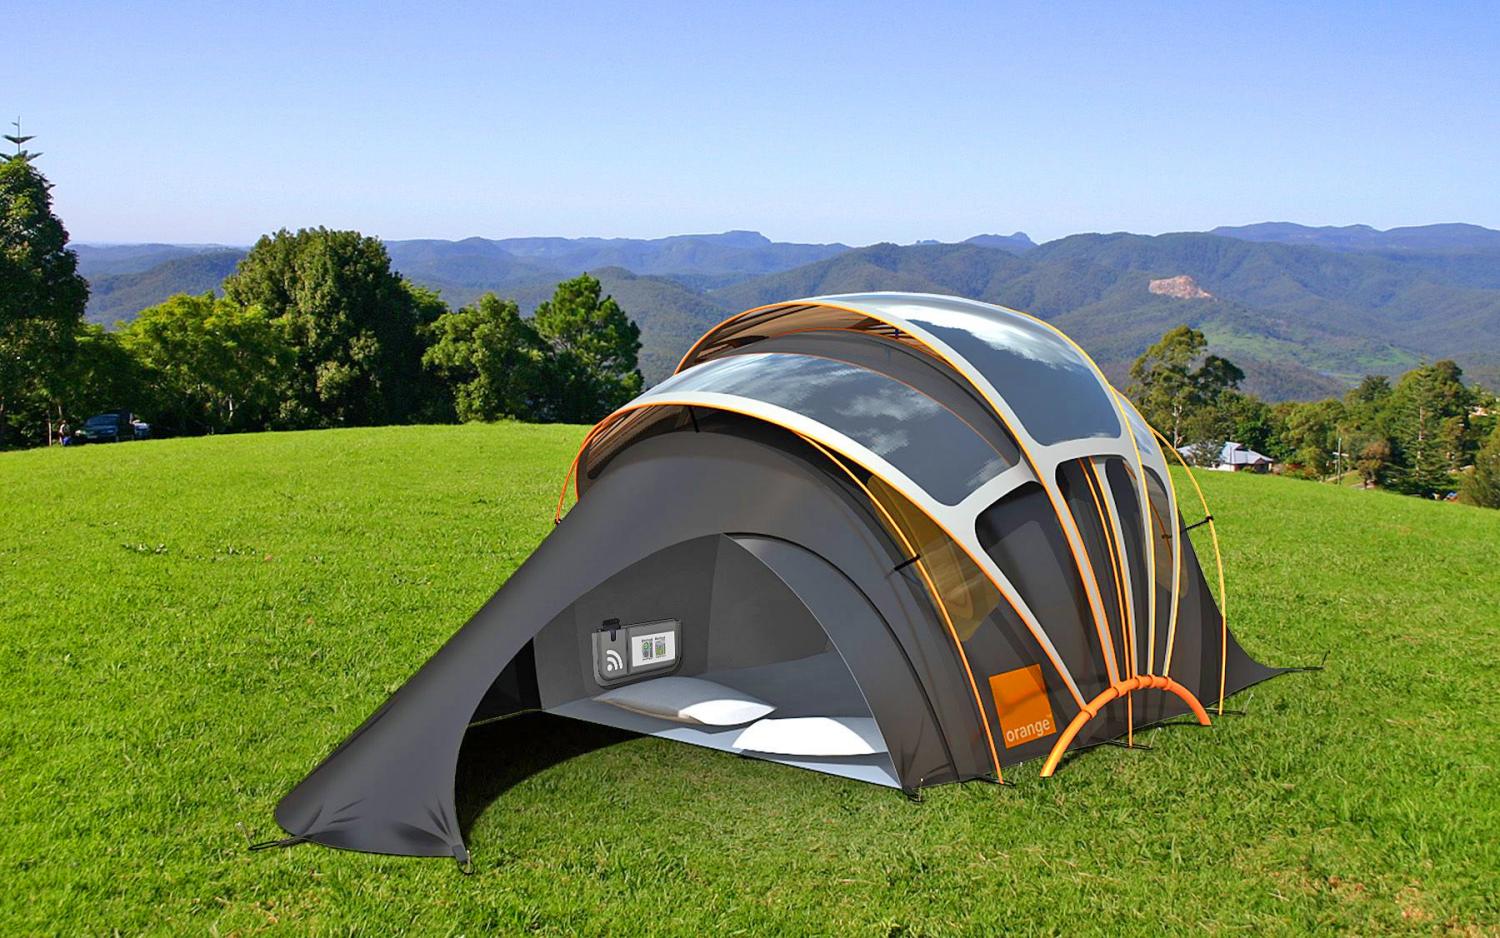 Solar Tent With Heated Floors - Chill n Charge Solar Tent From Orange and Kaleidoscope Design